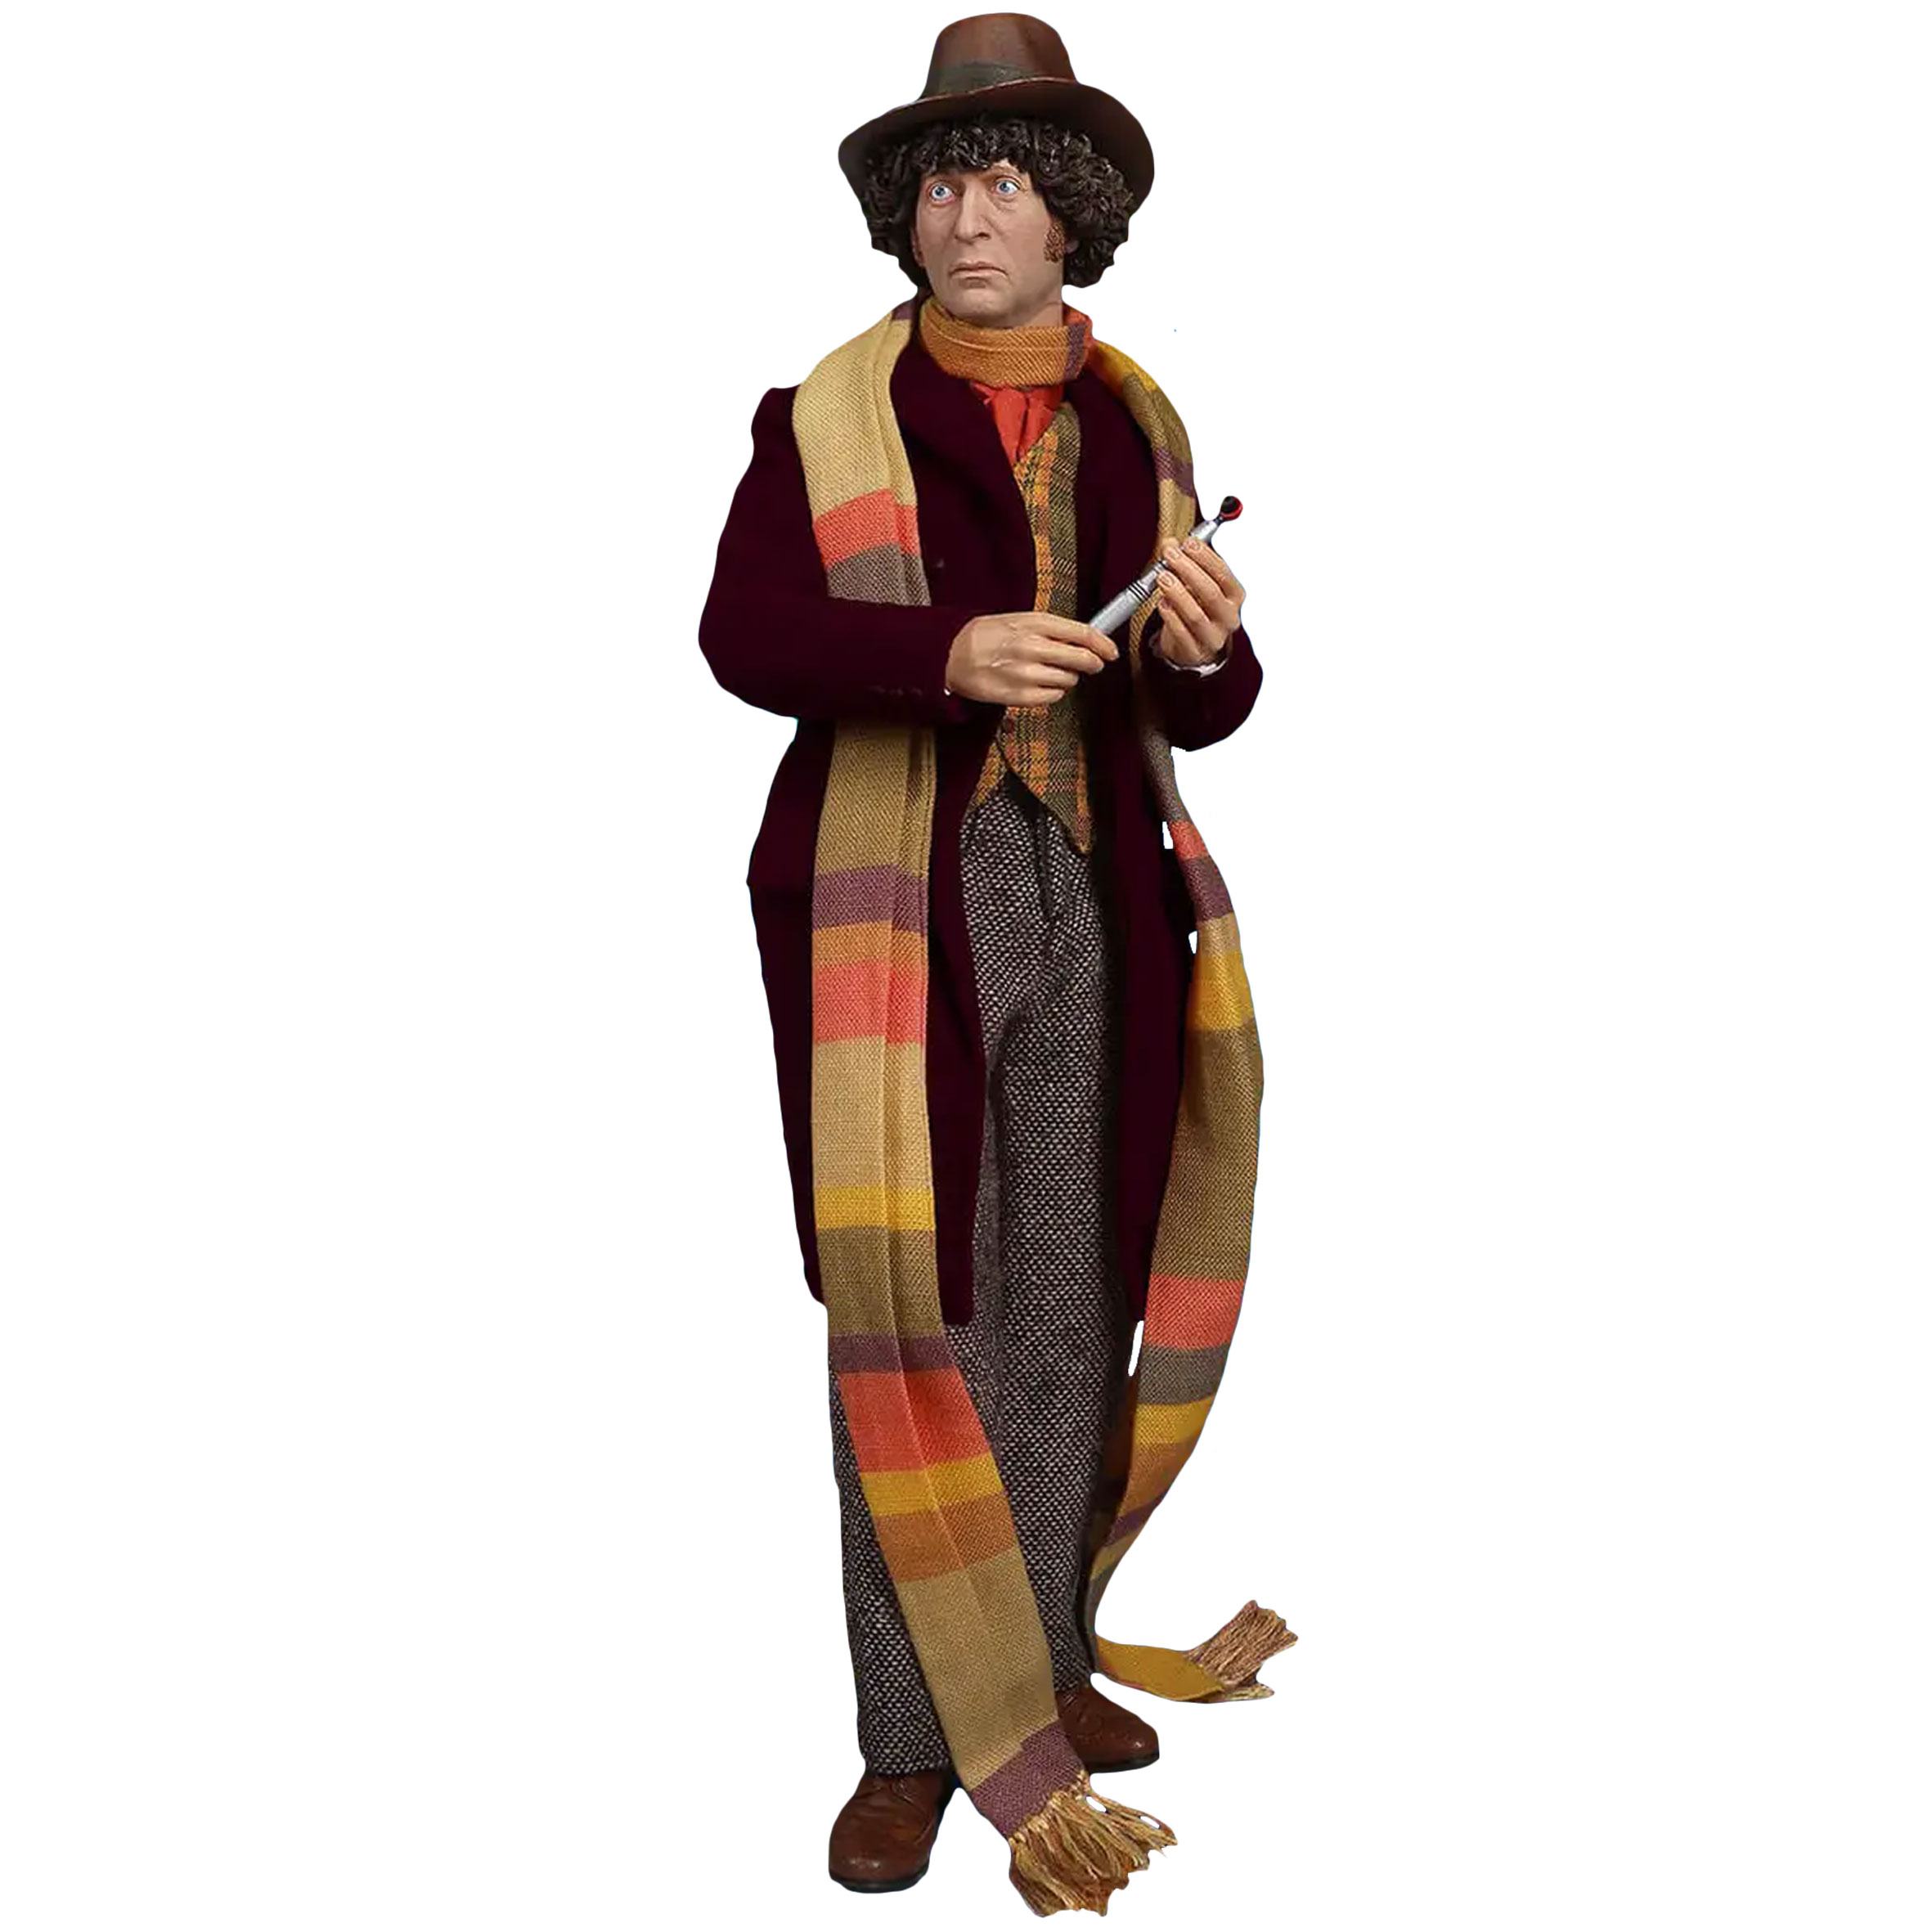 Doctor Who Big Chief 4th Doctor Tom Baker Collector's Edition 1:6 Scale Figure